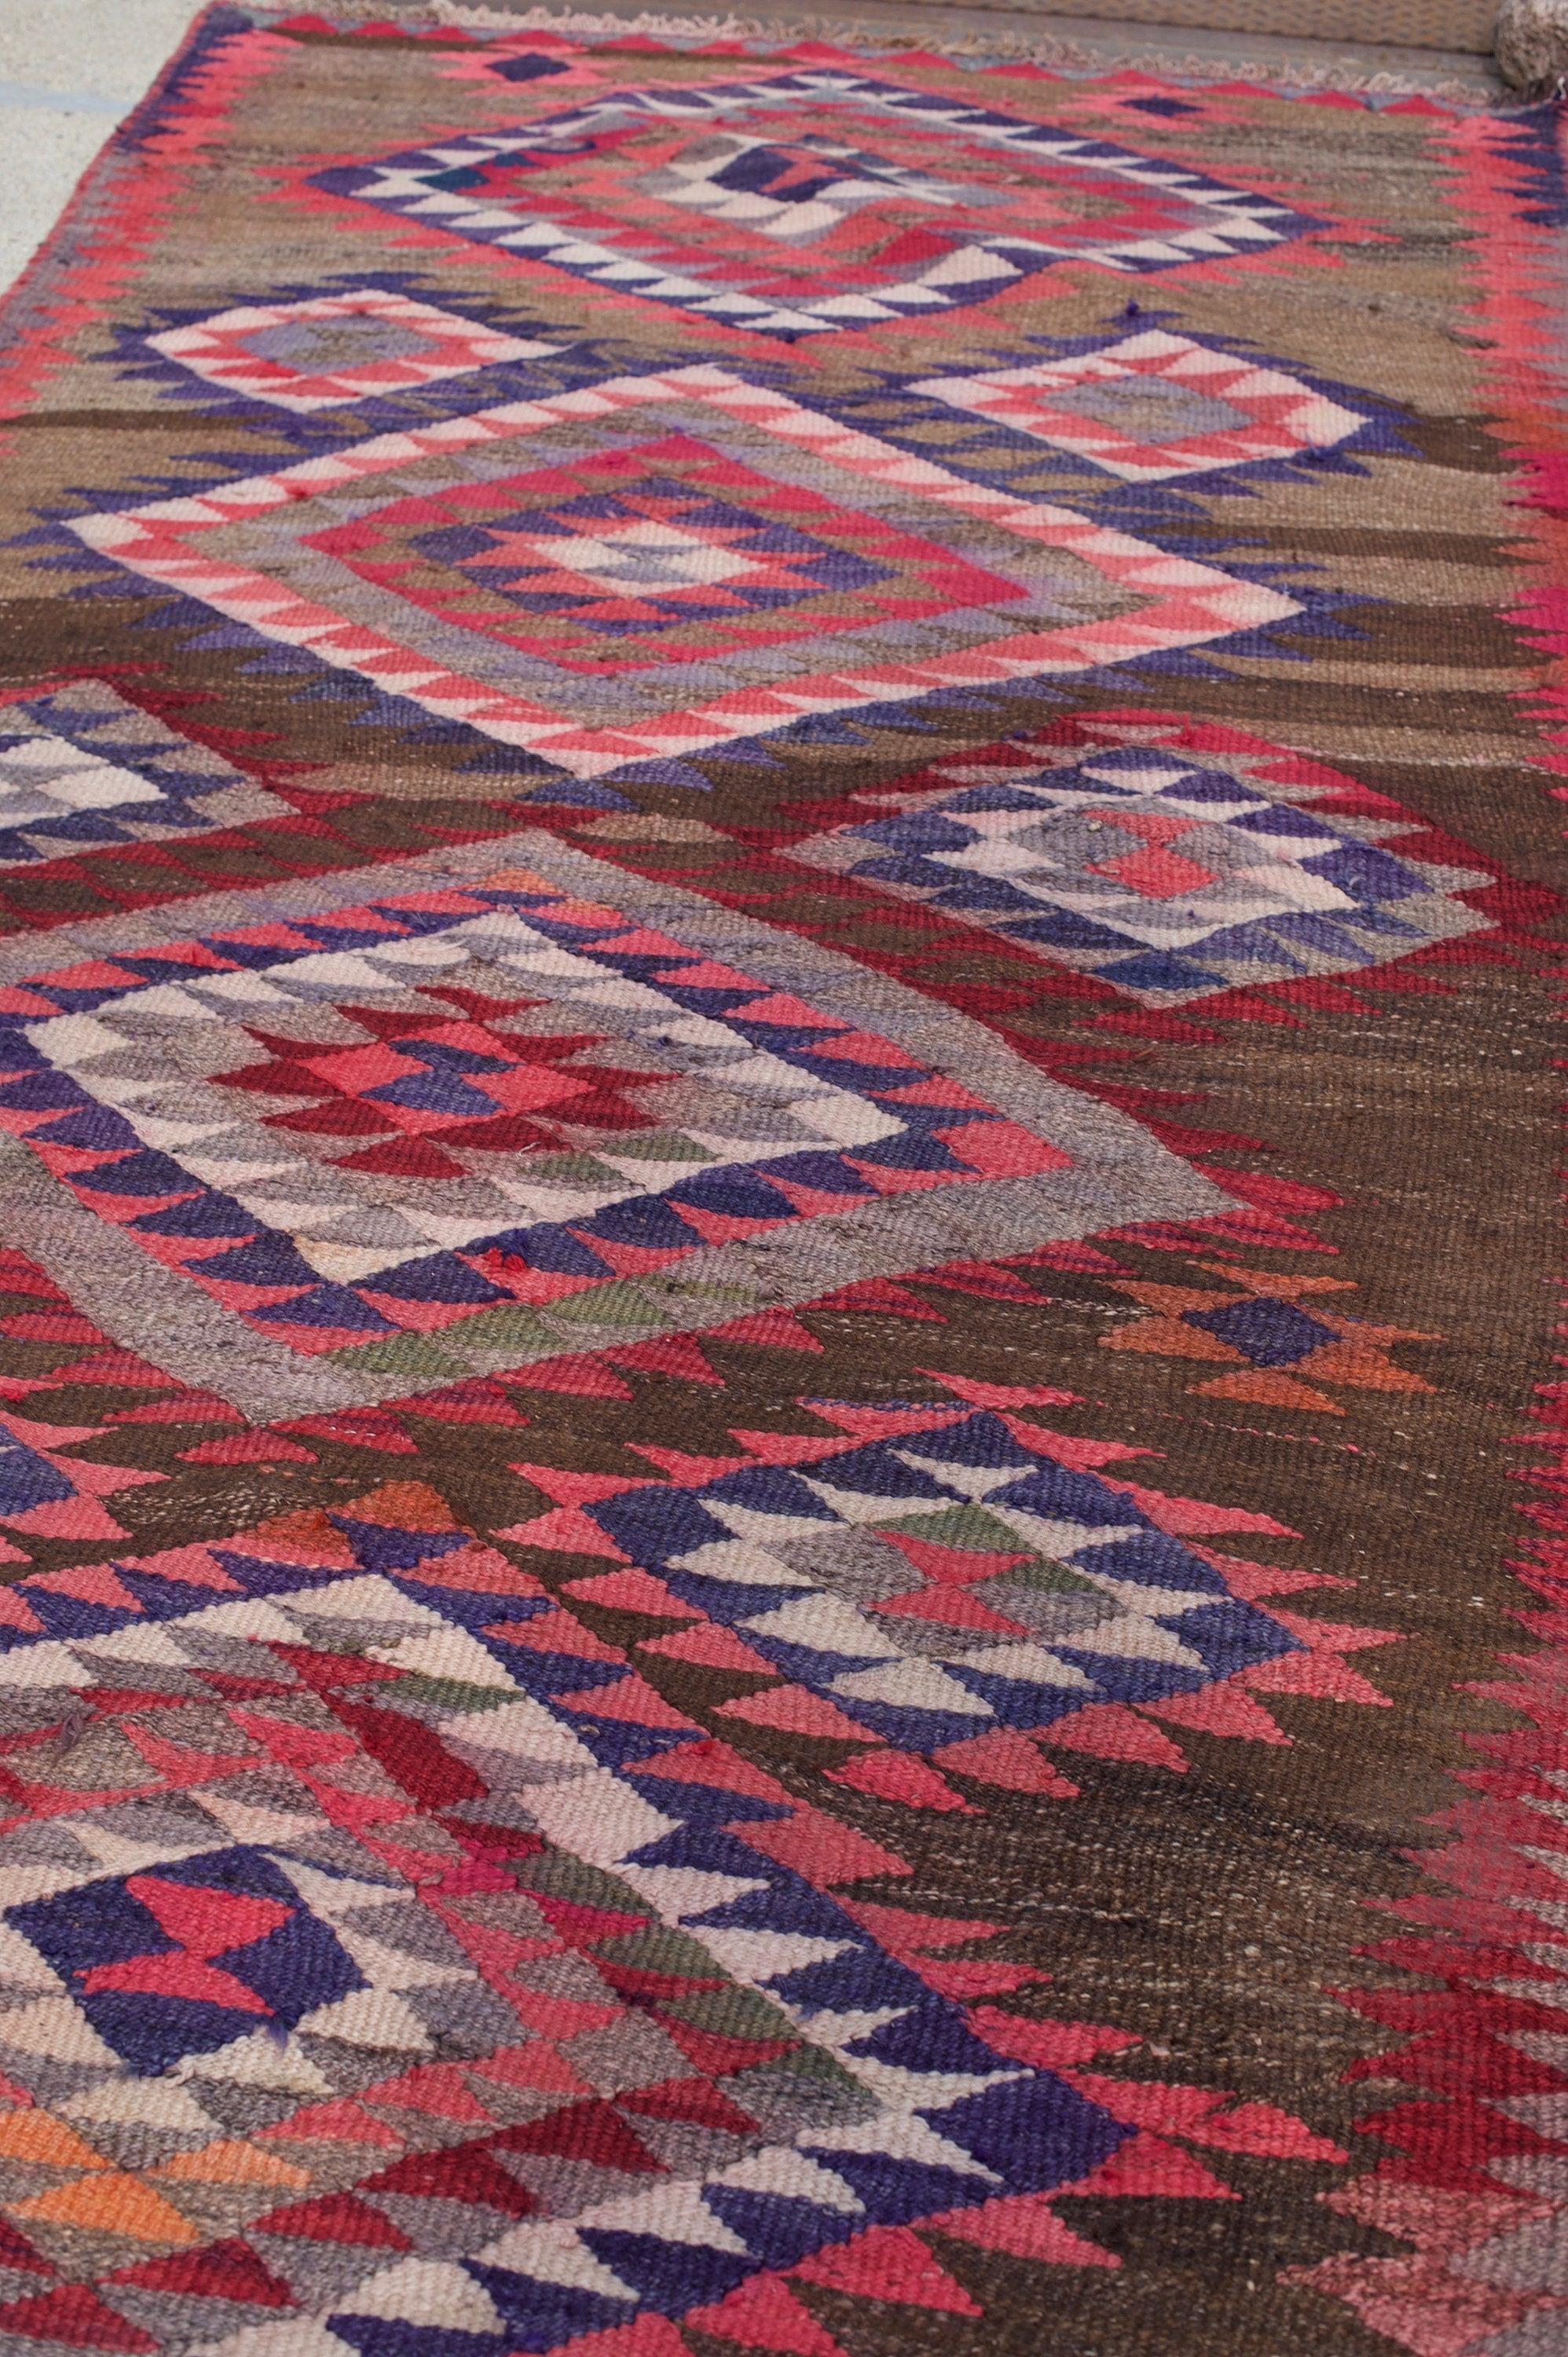 Kelly Vintage Pink Tribal Kilim Rug

About: Very fun & happy rug! This rug has a nice body, unlike other and most Kilims. The rug can be used on both sides (reversible), and there is some subtle discoloration on some areas (color run), but nothing